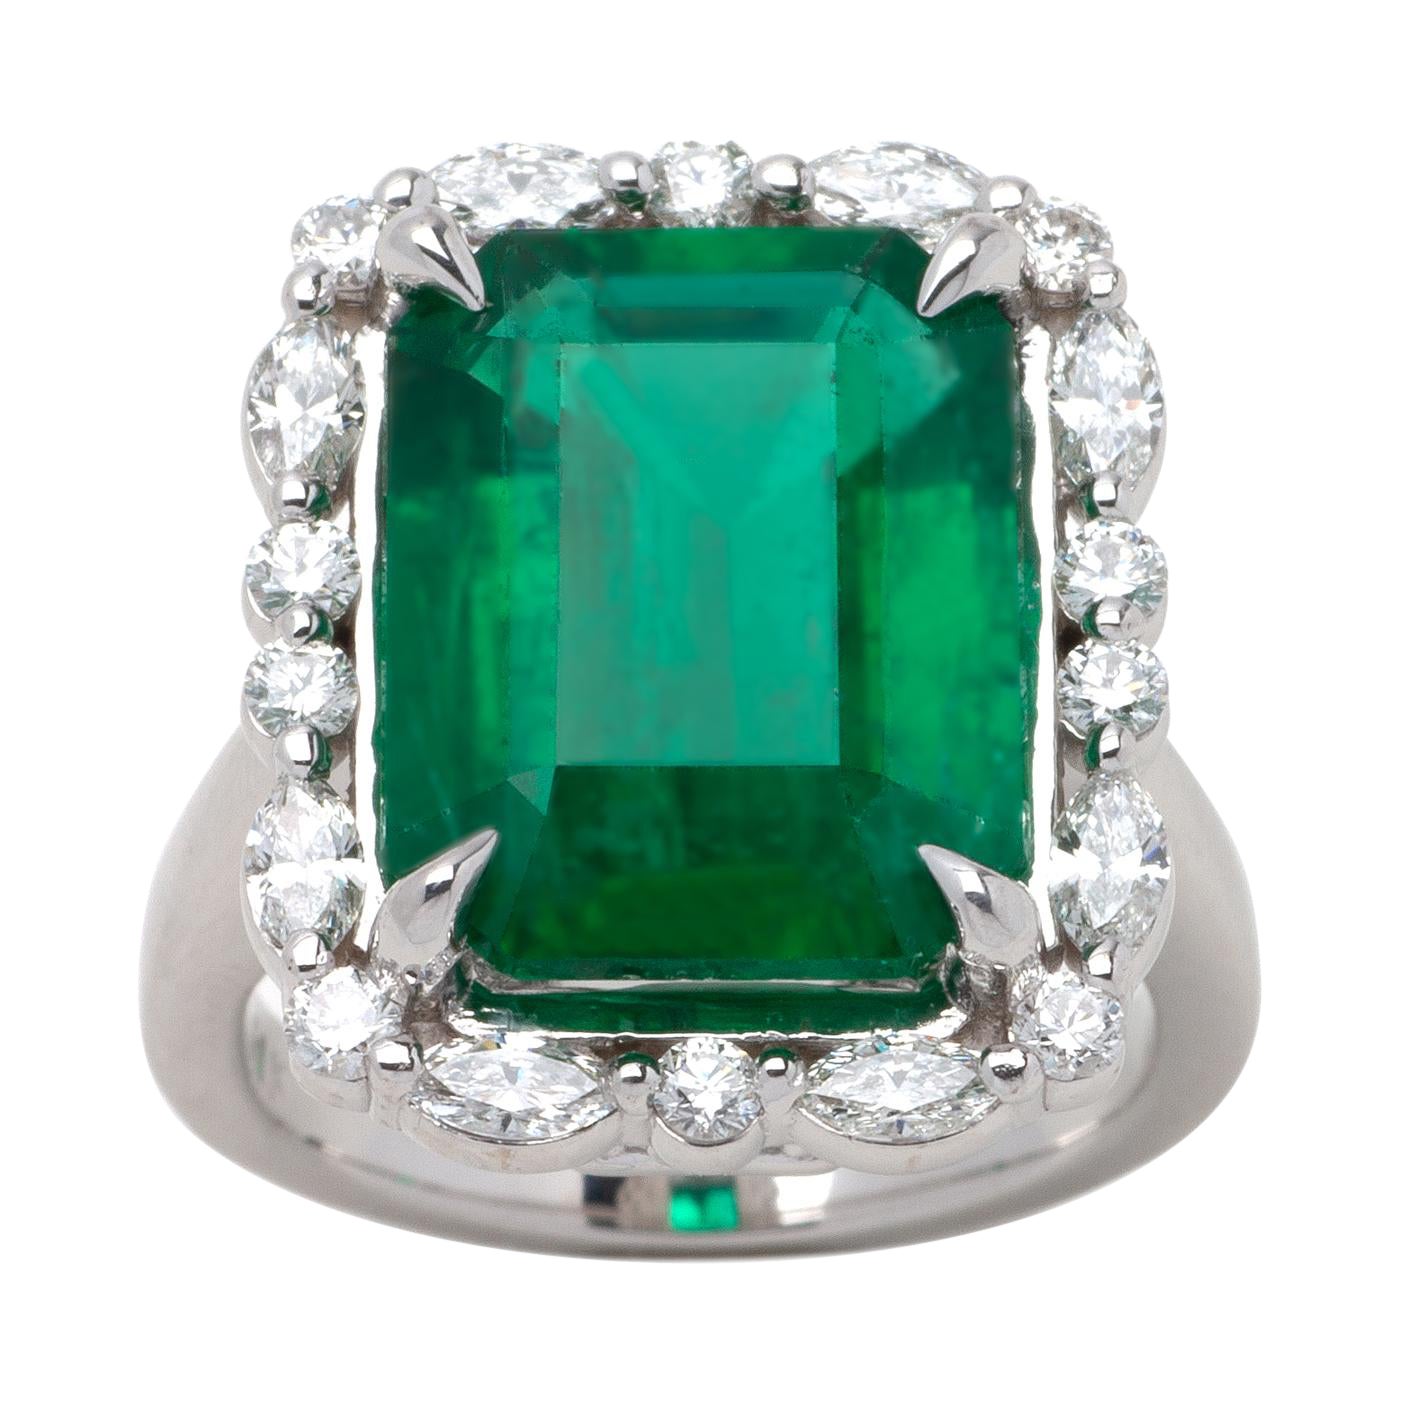 7.28ct Emerald Halo Ring in 14K White Gold, 1.00ct Side Diamonds